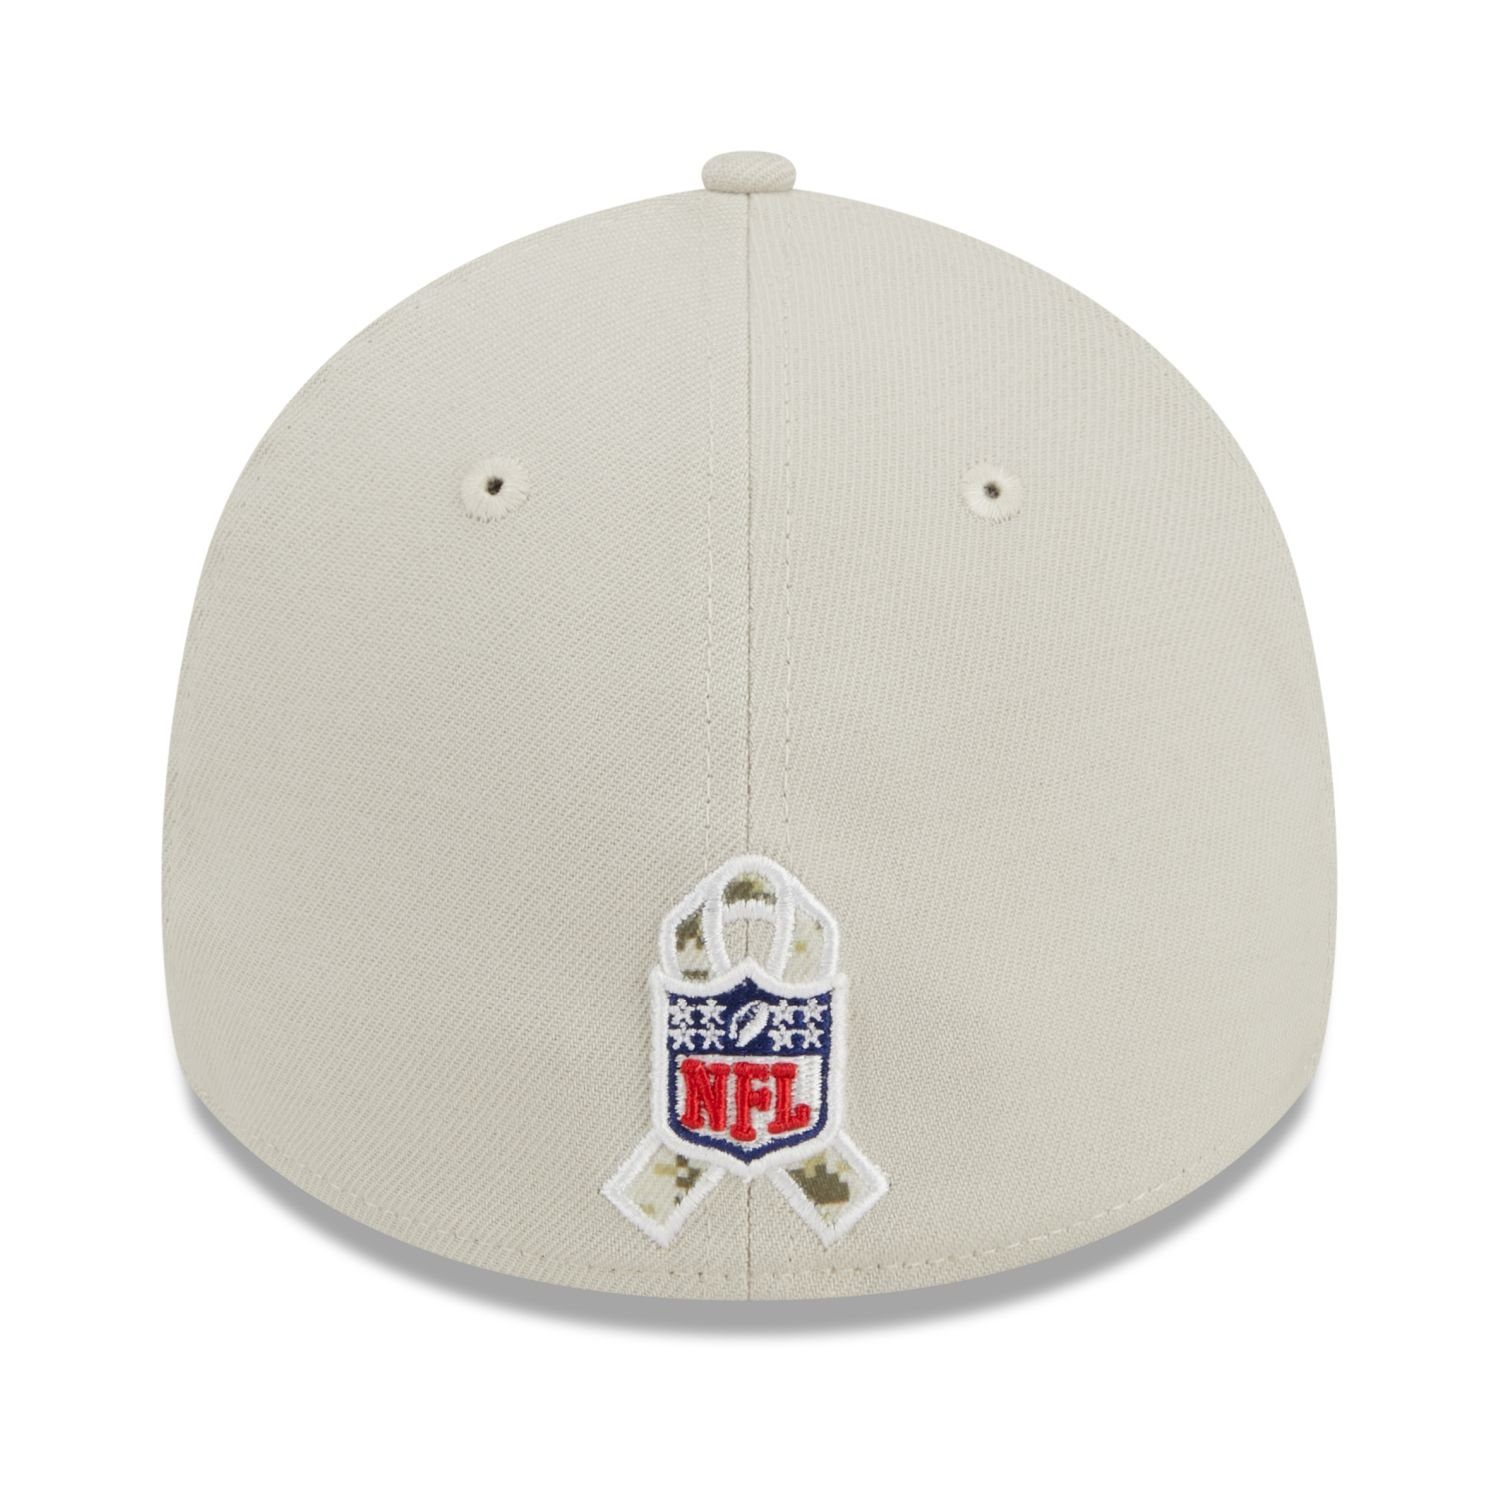 Chargers StretchFit Flex to Los Era New NFL 39Thirty Service Angeles Cap Salute